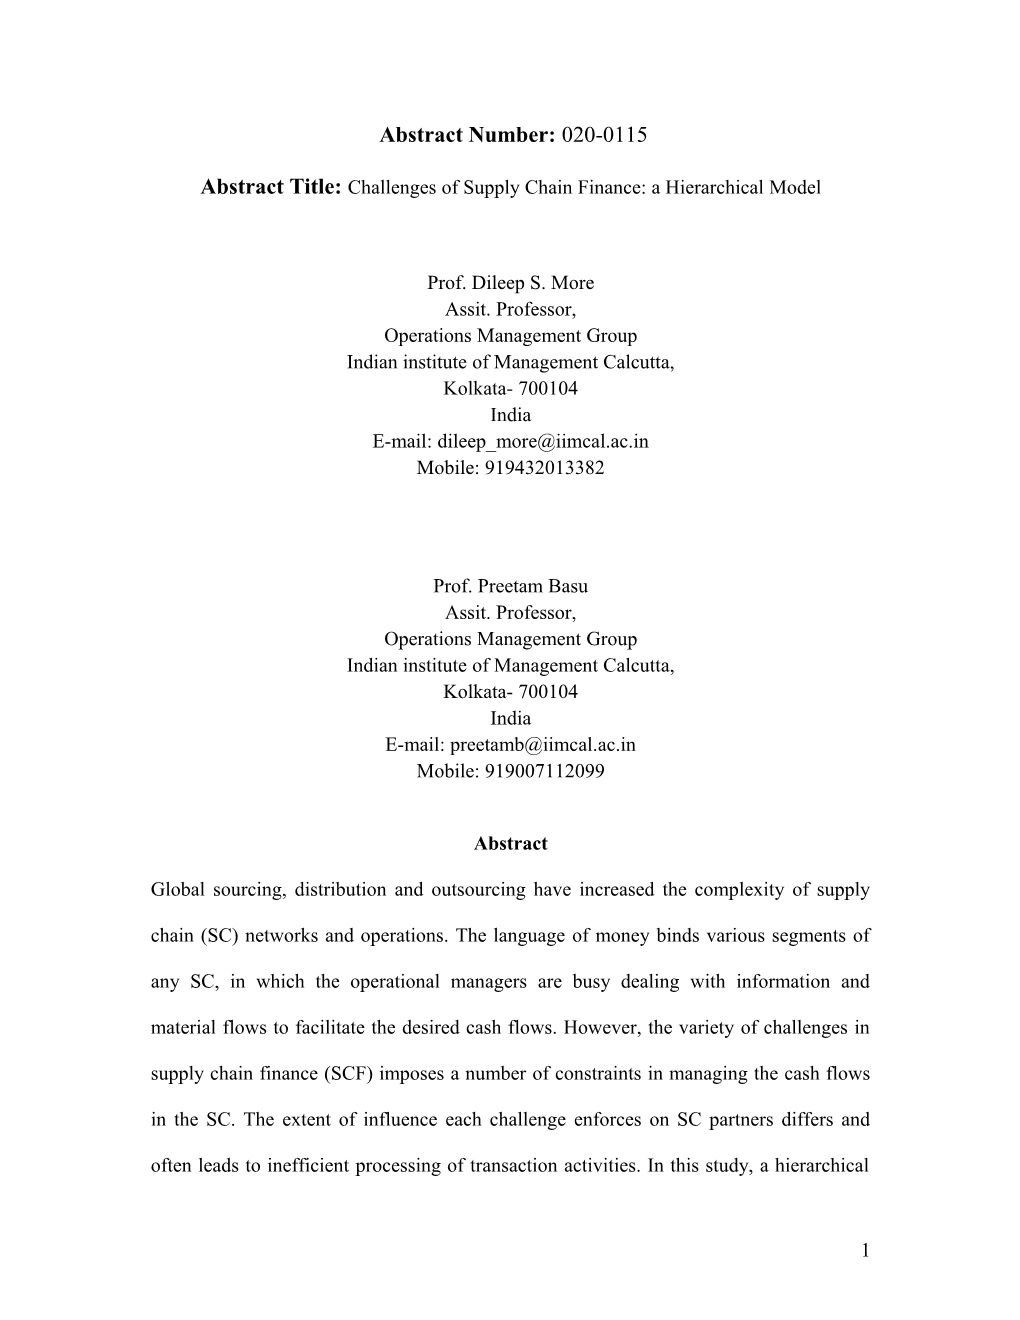 Uncertainty Dynamics in the Supply Chain- an Interpretive Structural Modeling Approach